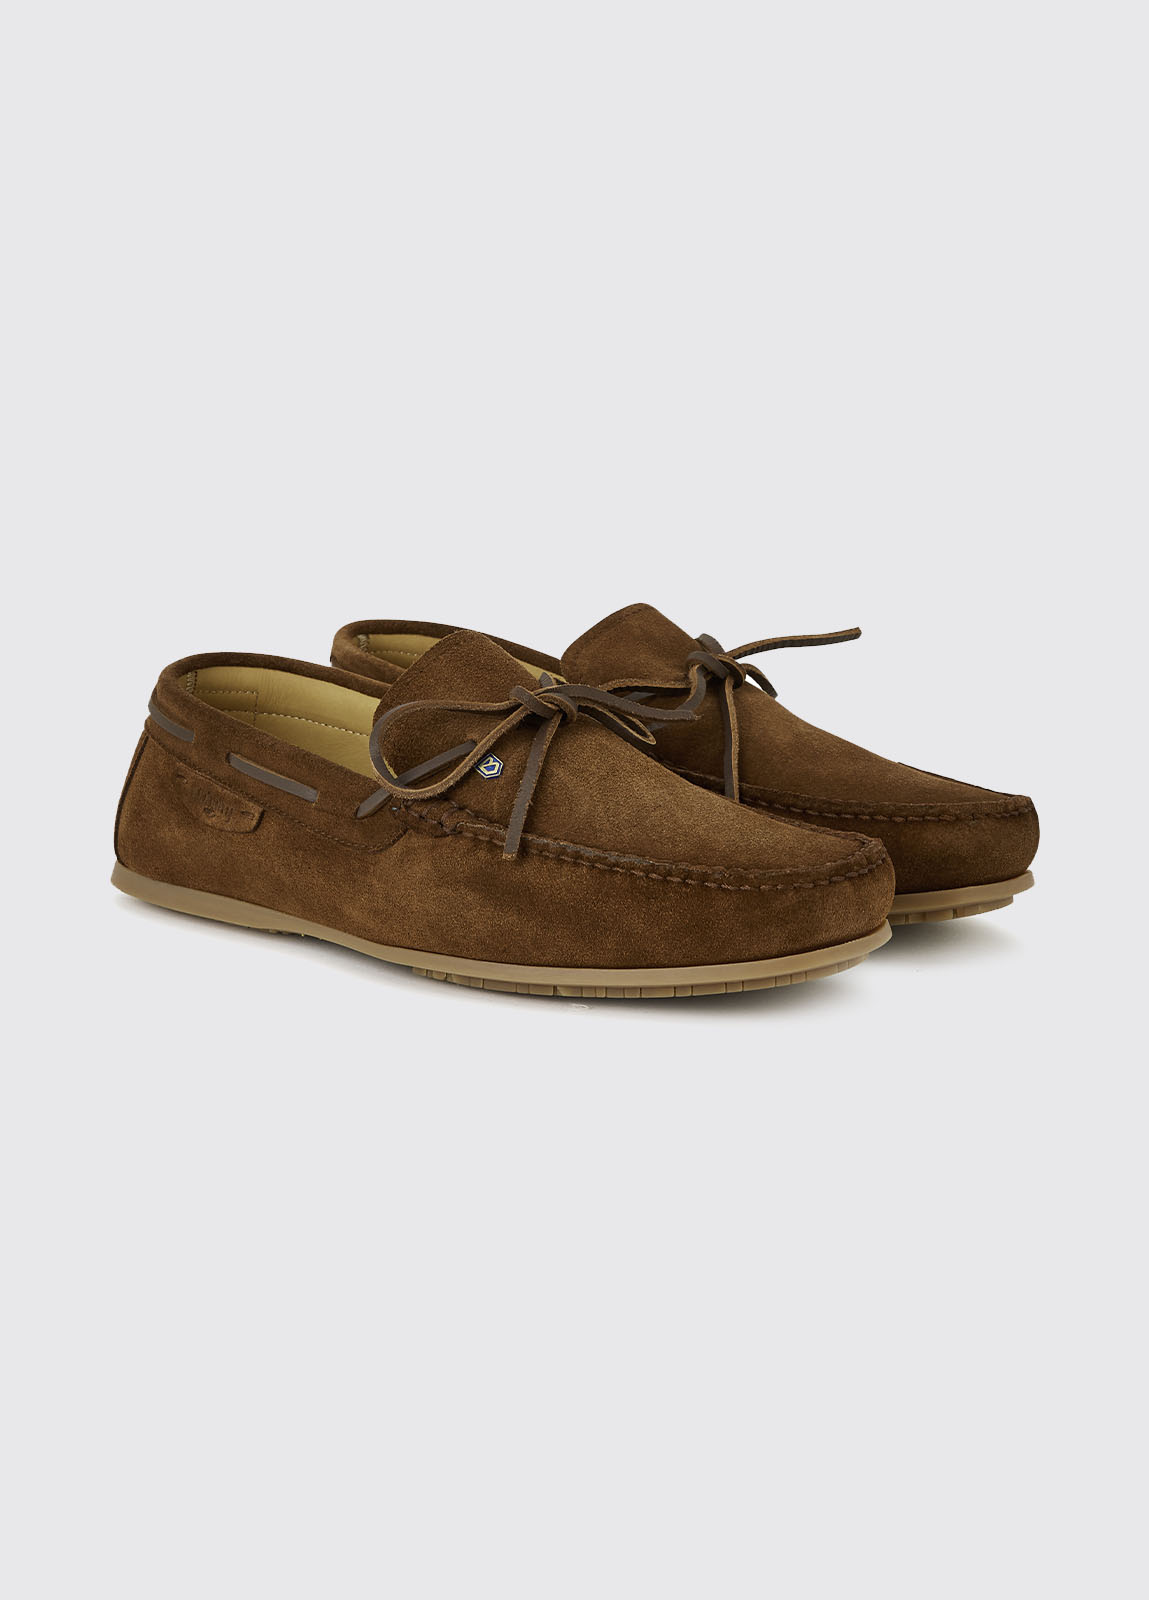 Shearwater Loafer - Tobacco